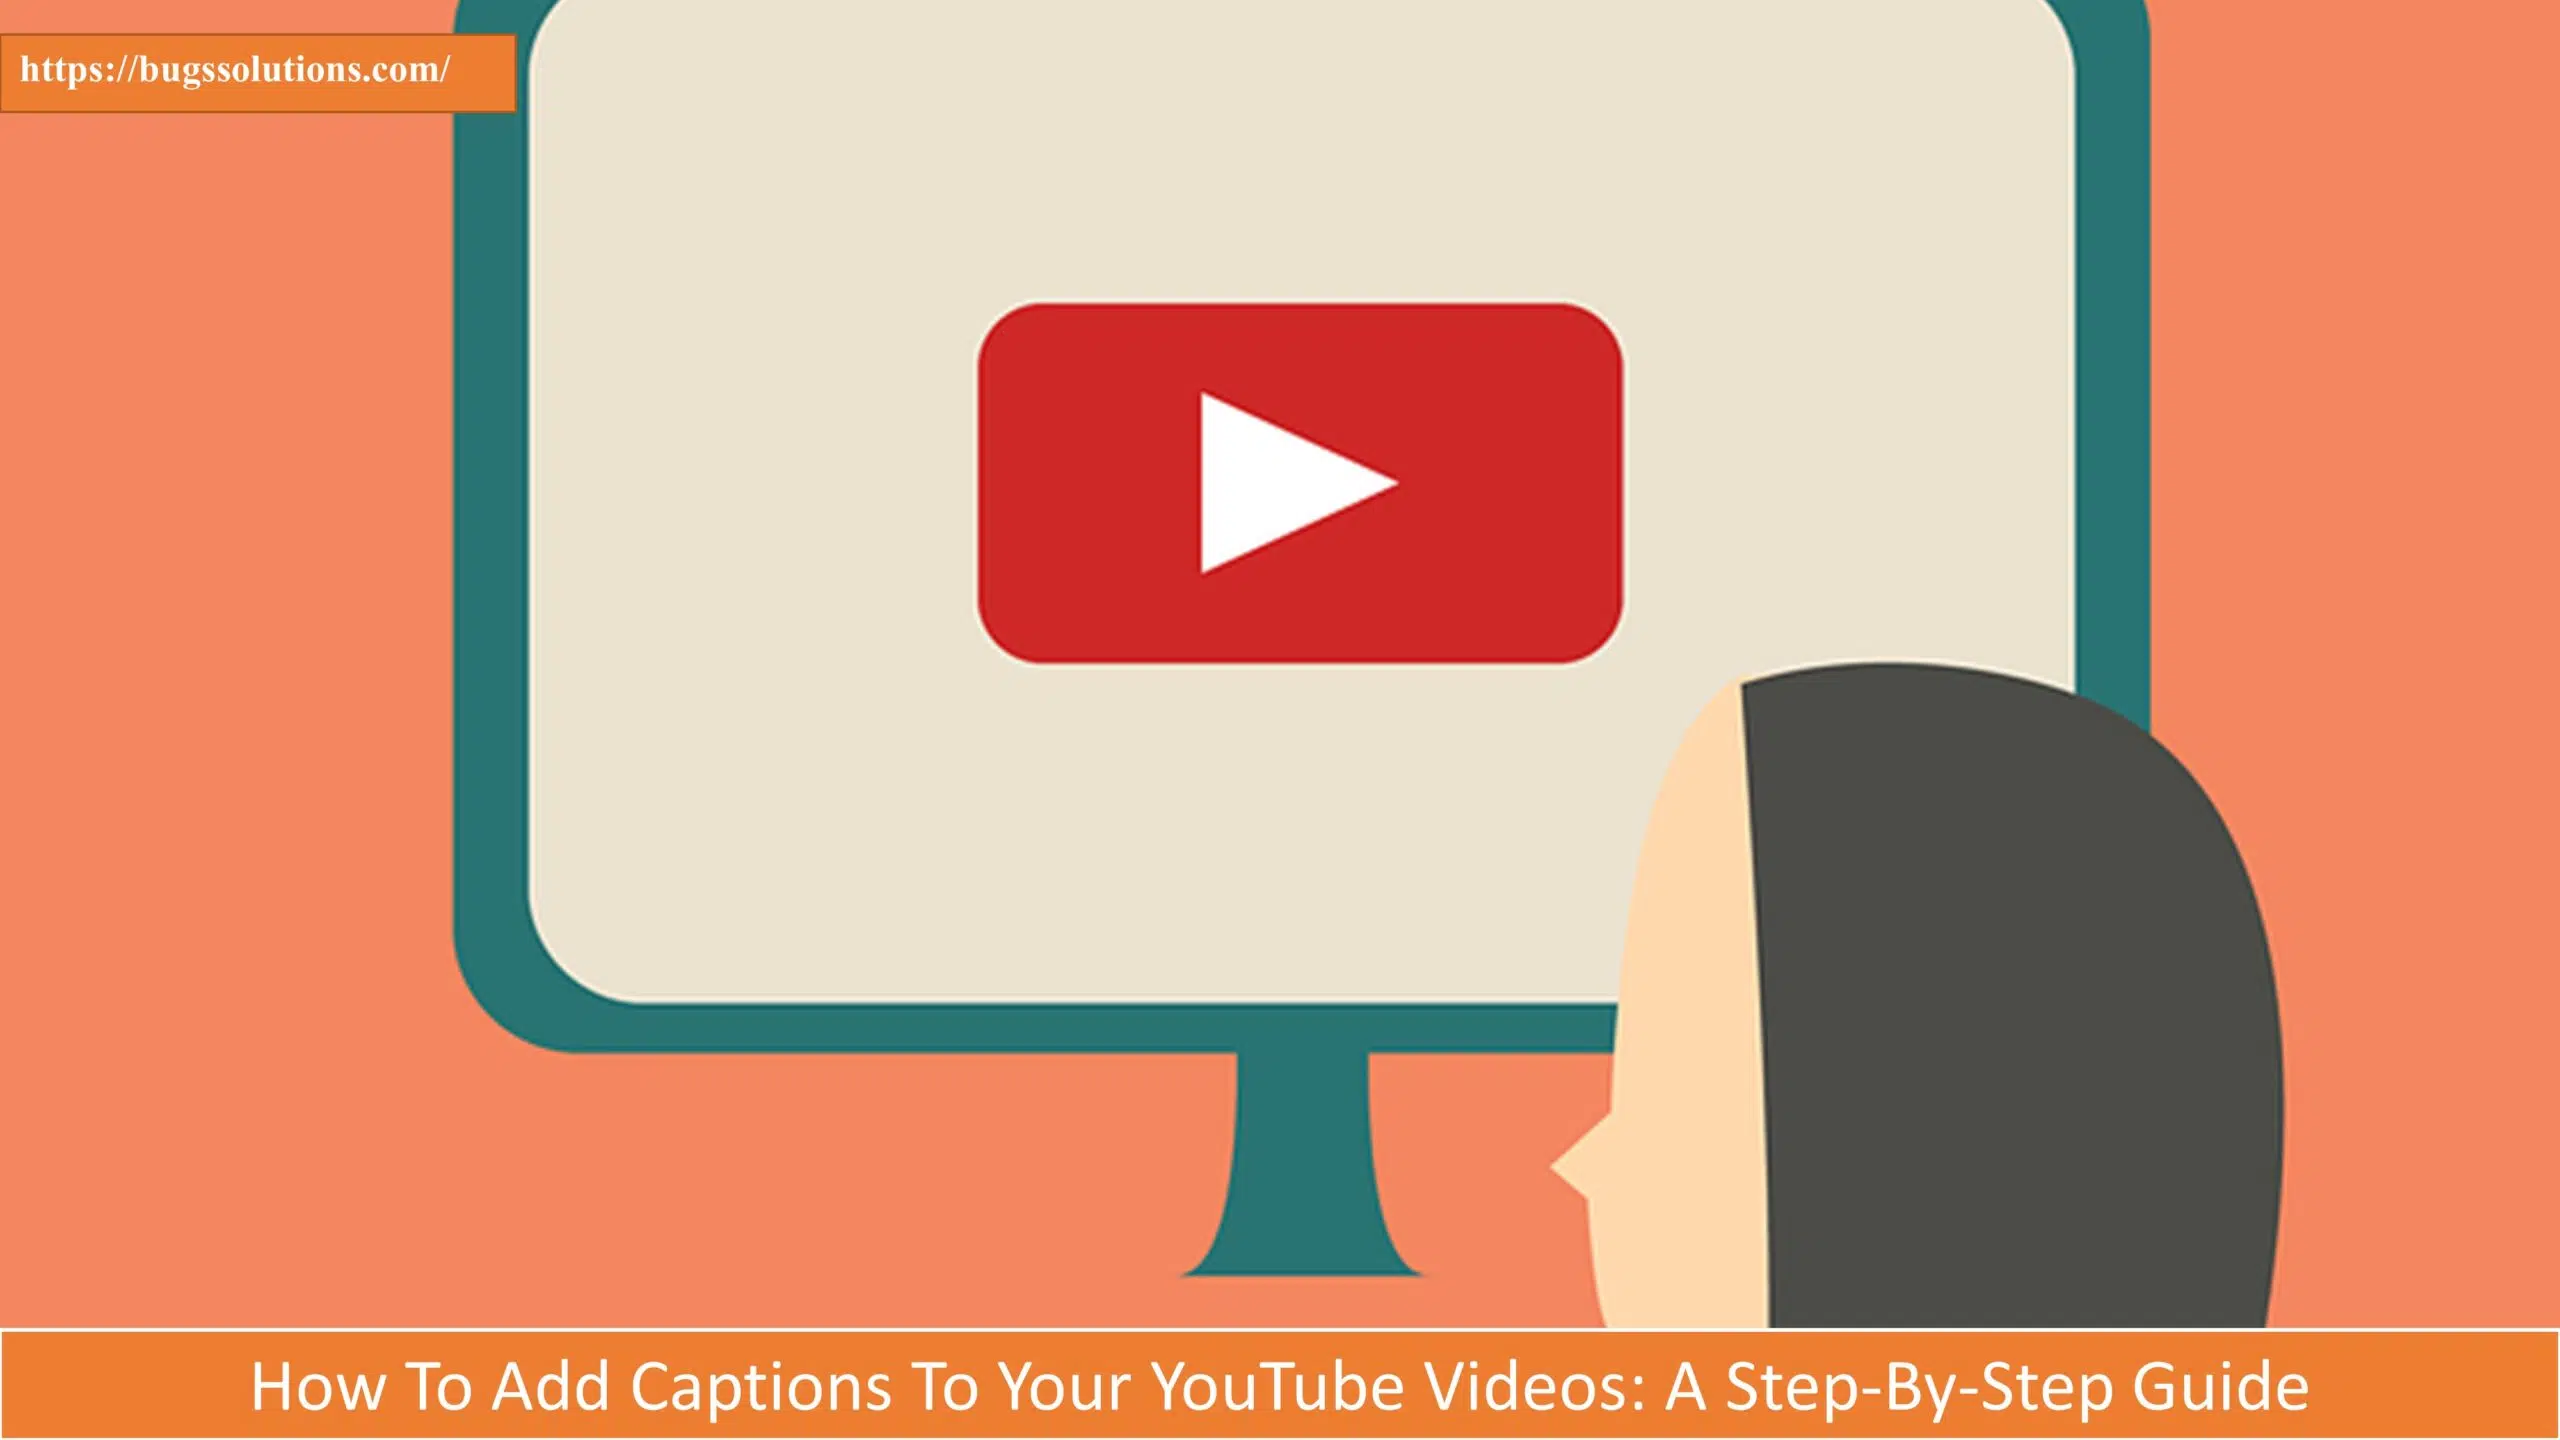 How To Add Captions To Your YouTube Videos: A Step-By-Step Guide